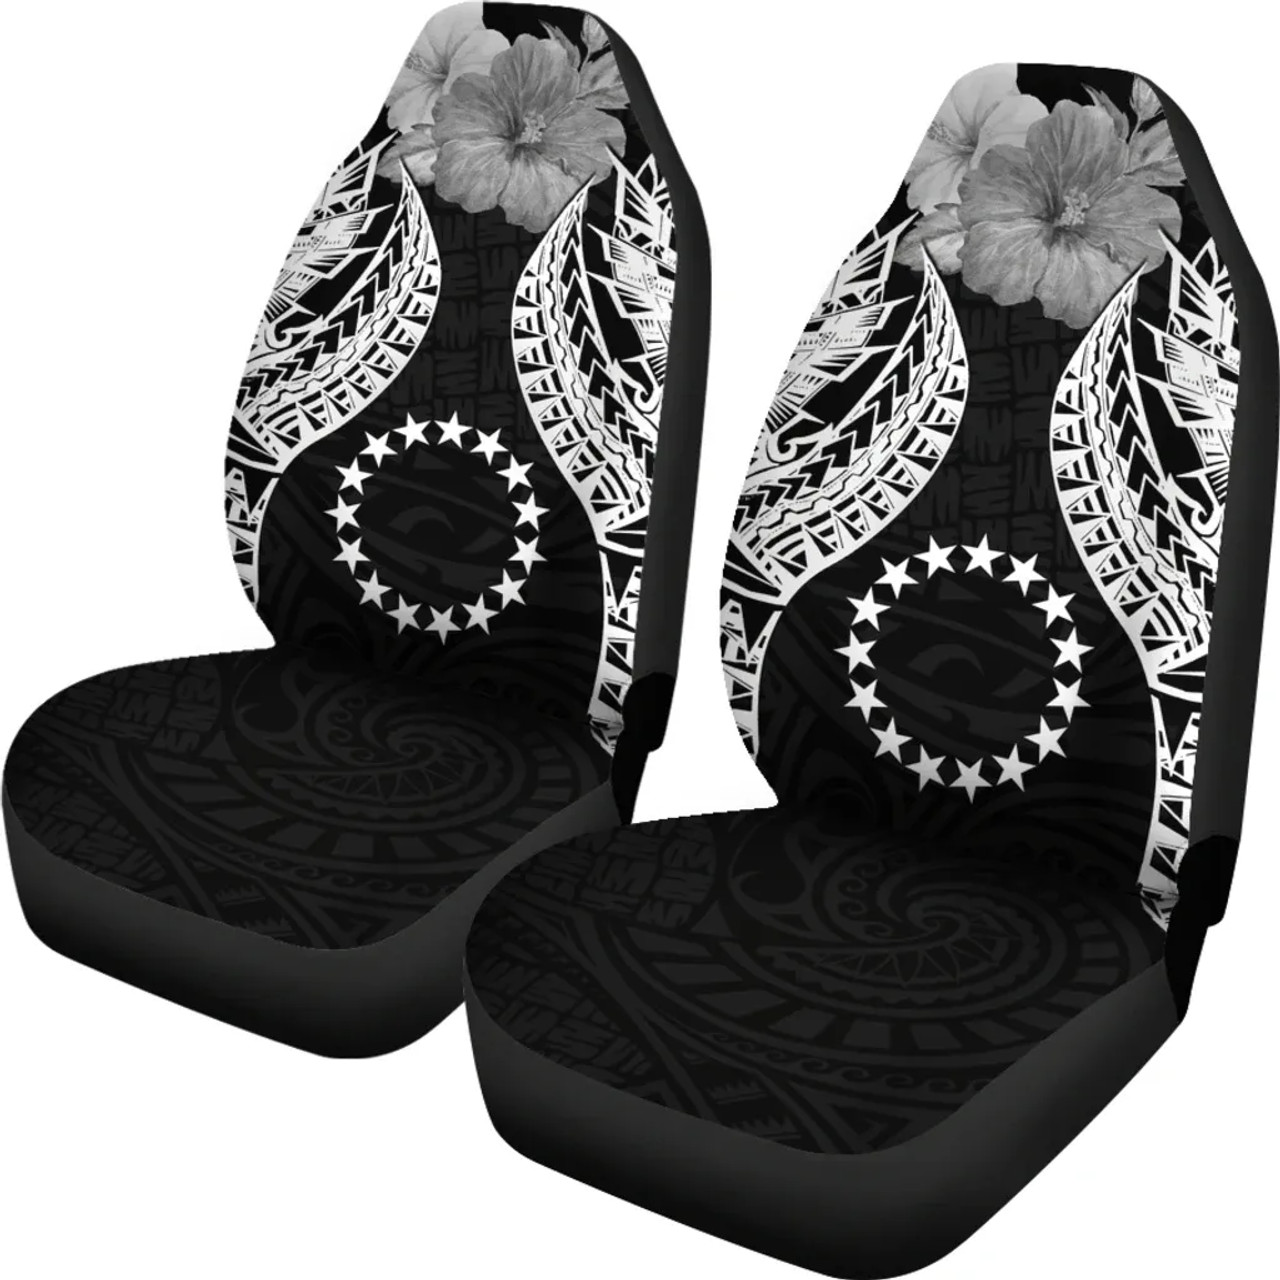 Cook islands Polynesian Car Seat Covers Pride Seal And Hibiscus Black